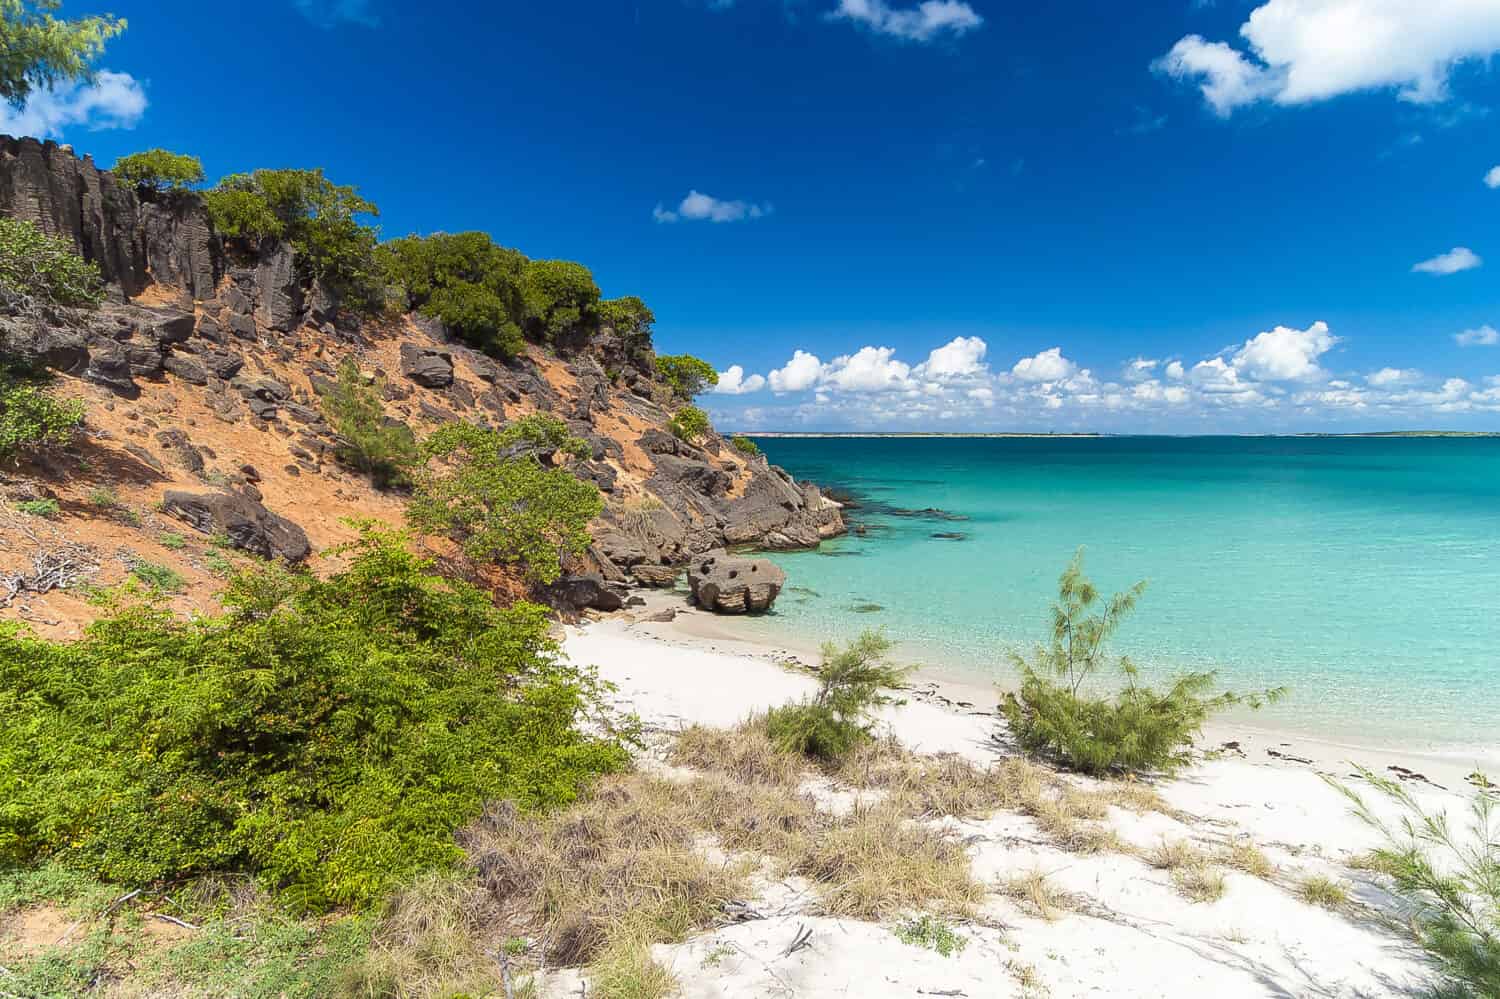 Beautiful coastline | Groote Eylandt | Northern TerritoryLovely combination of colors from the top of this hill on North East Island, an important sea turtle rookery, off Groote Eylandt.